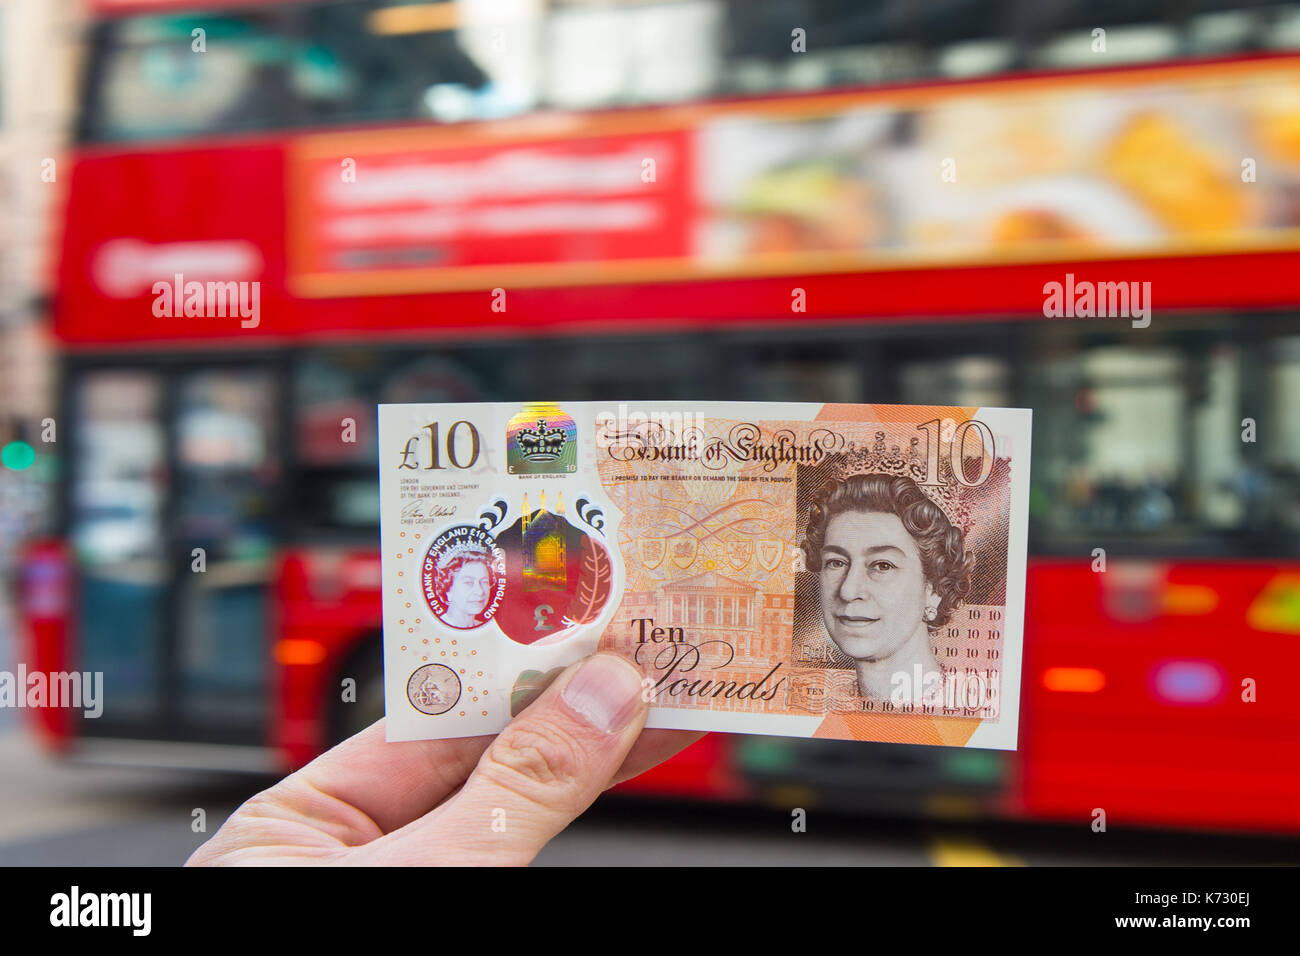 A man holds a new ten pound note featuring Jane Austen in London. Stock Photo